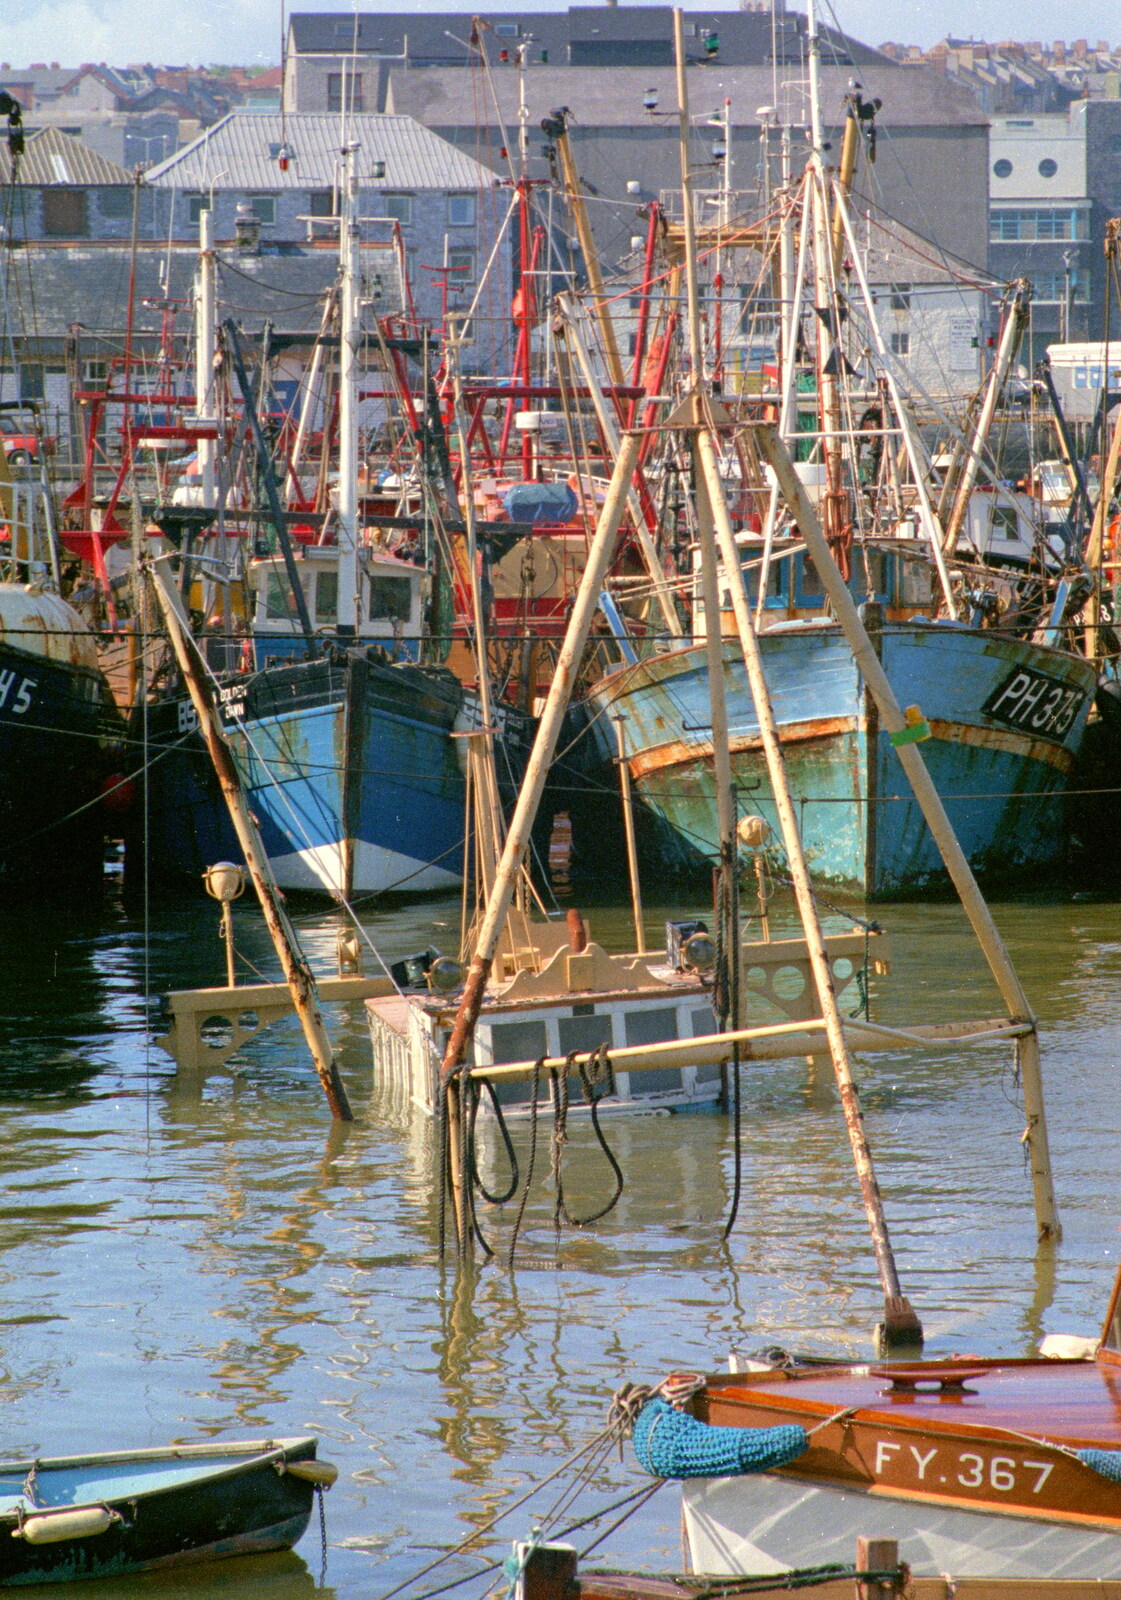 A scuttled fishing boat in Sutton Harbour from Uni: Night and Day on the Barbican, Plymouth, Devon - 1st May 1986